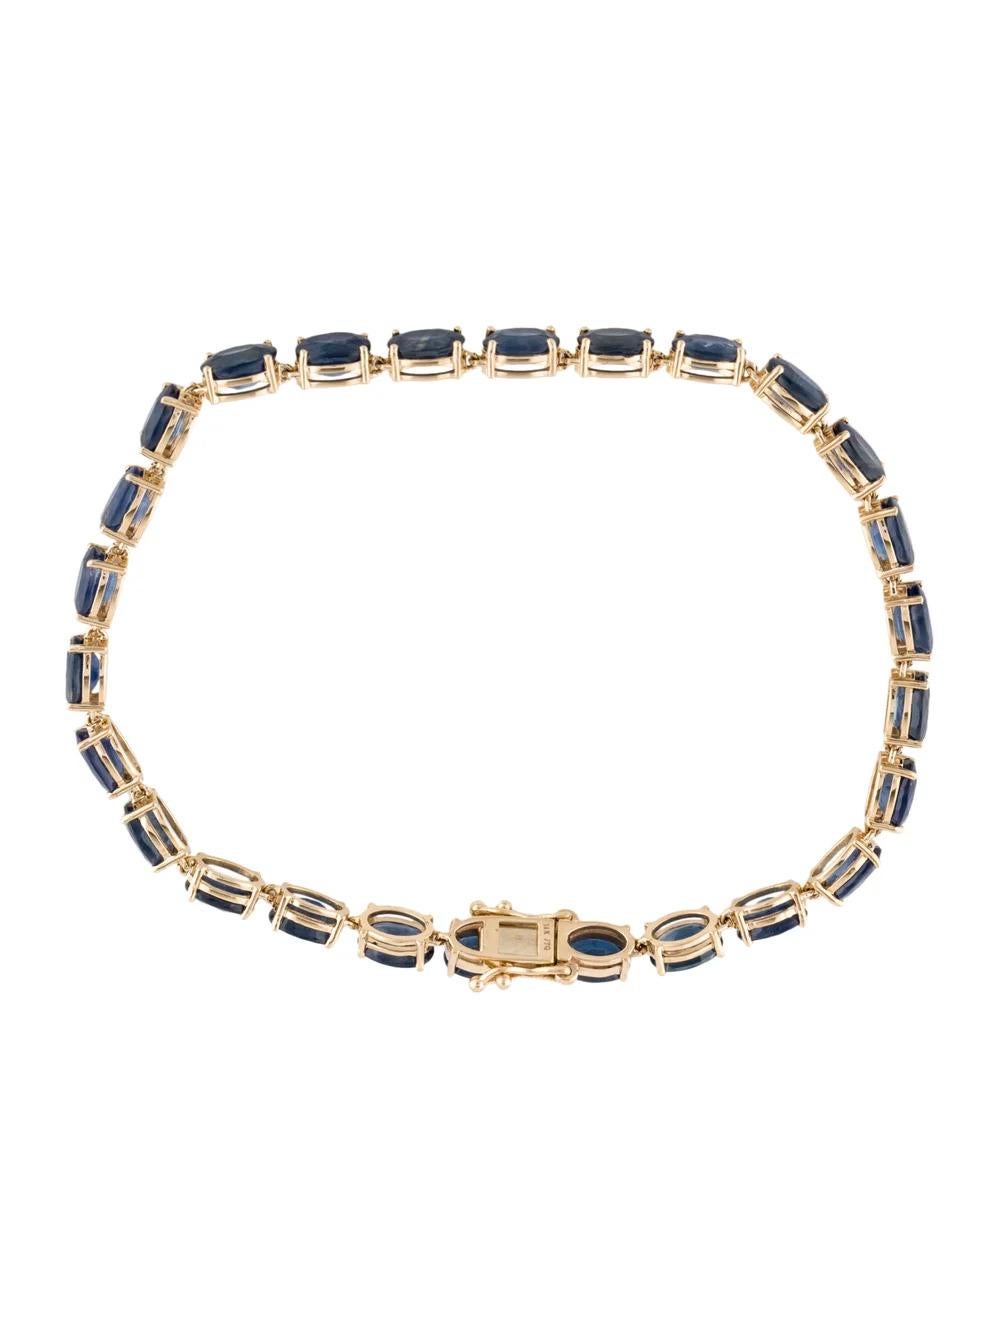 14K Gold 15.60ctw Sapphire Link Bracelet - Fine Jewelry Piece, Timeless Elegance In New Condition For Sale In Holtsville, NY